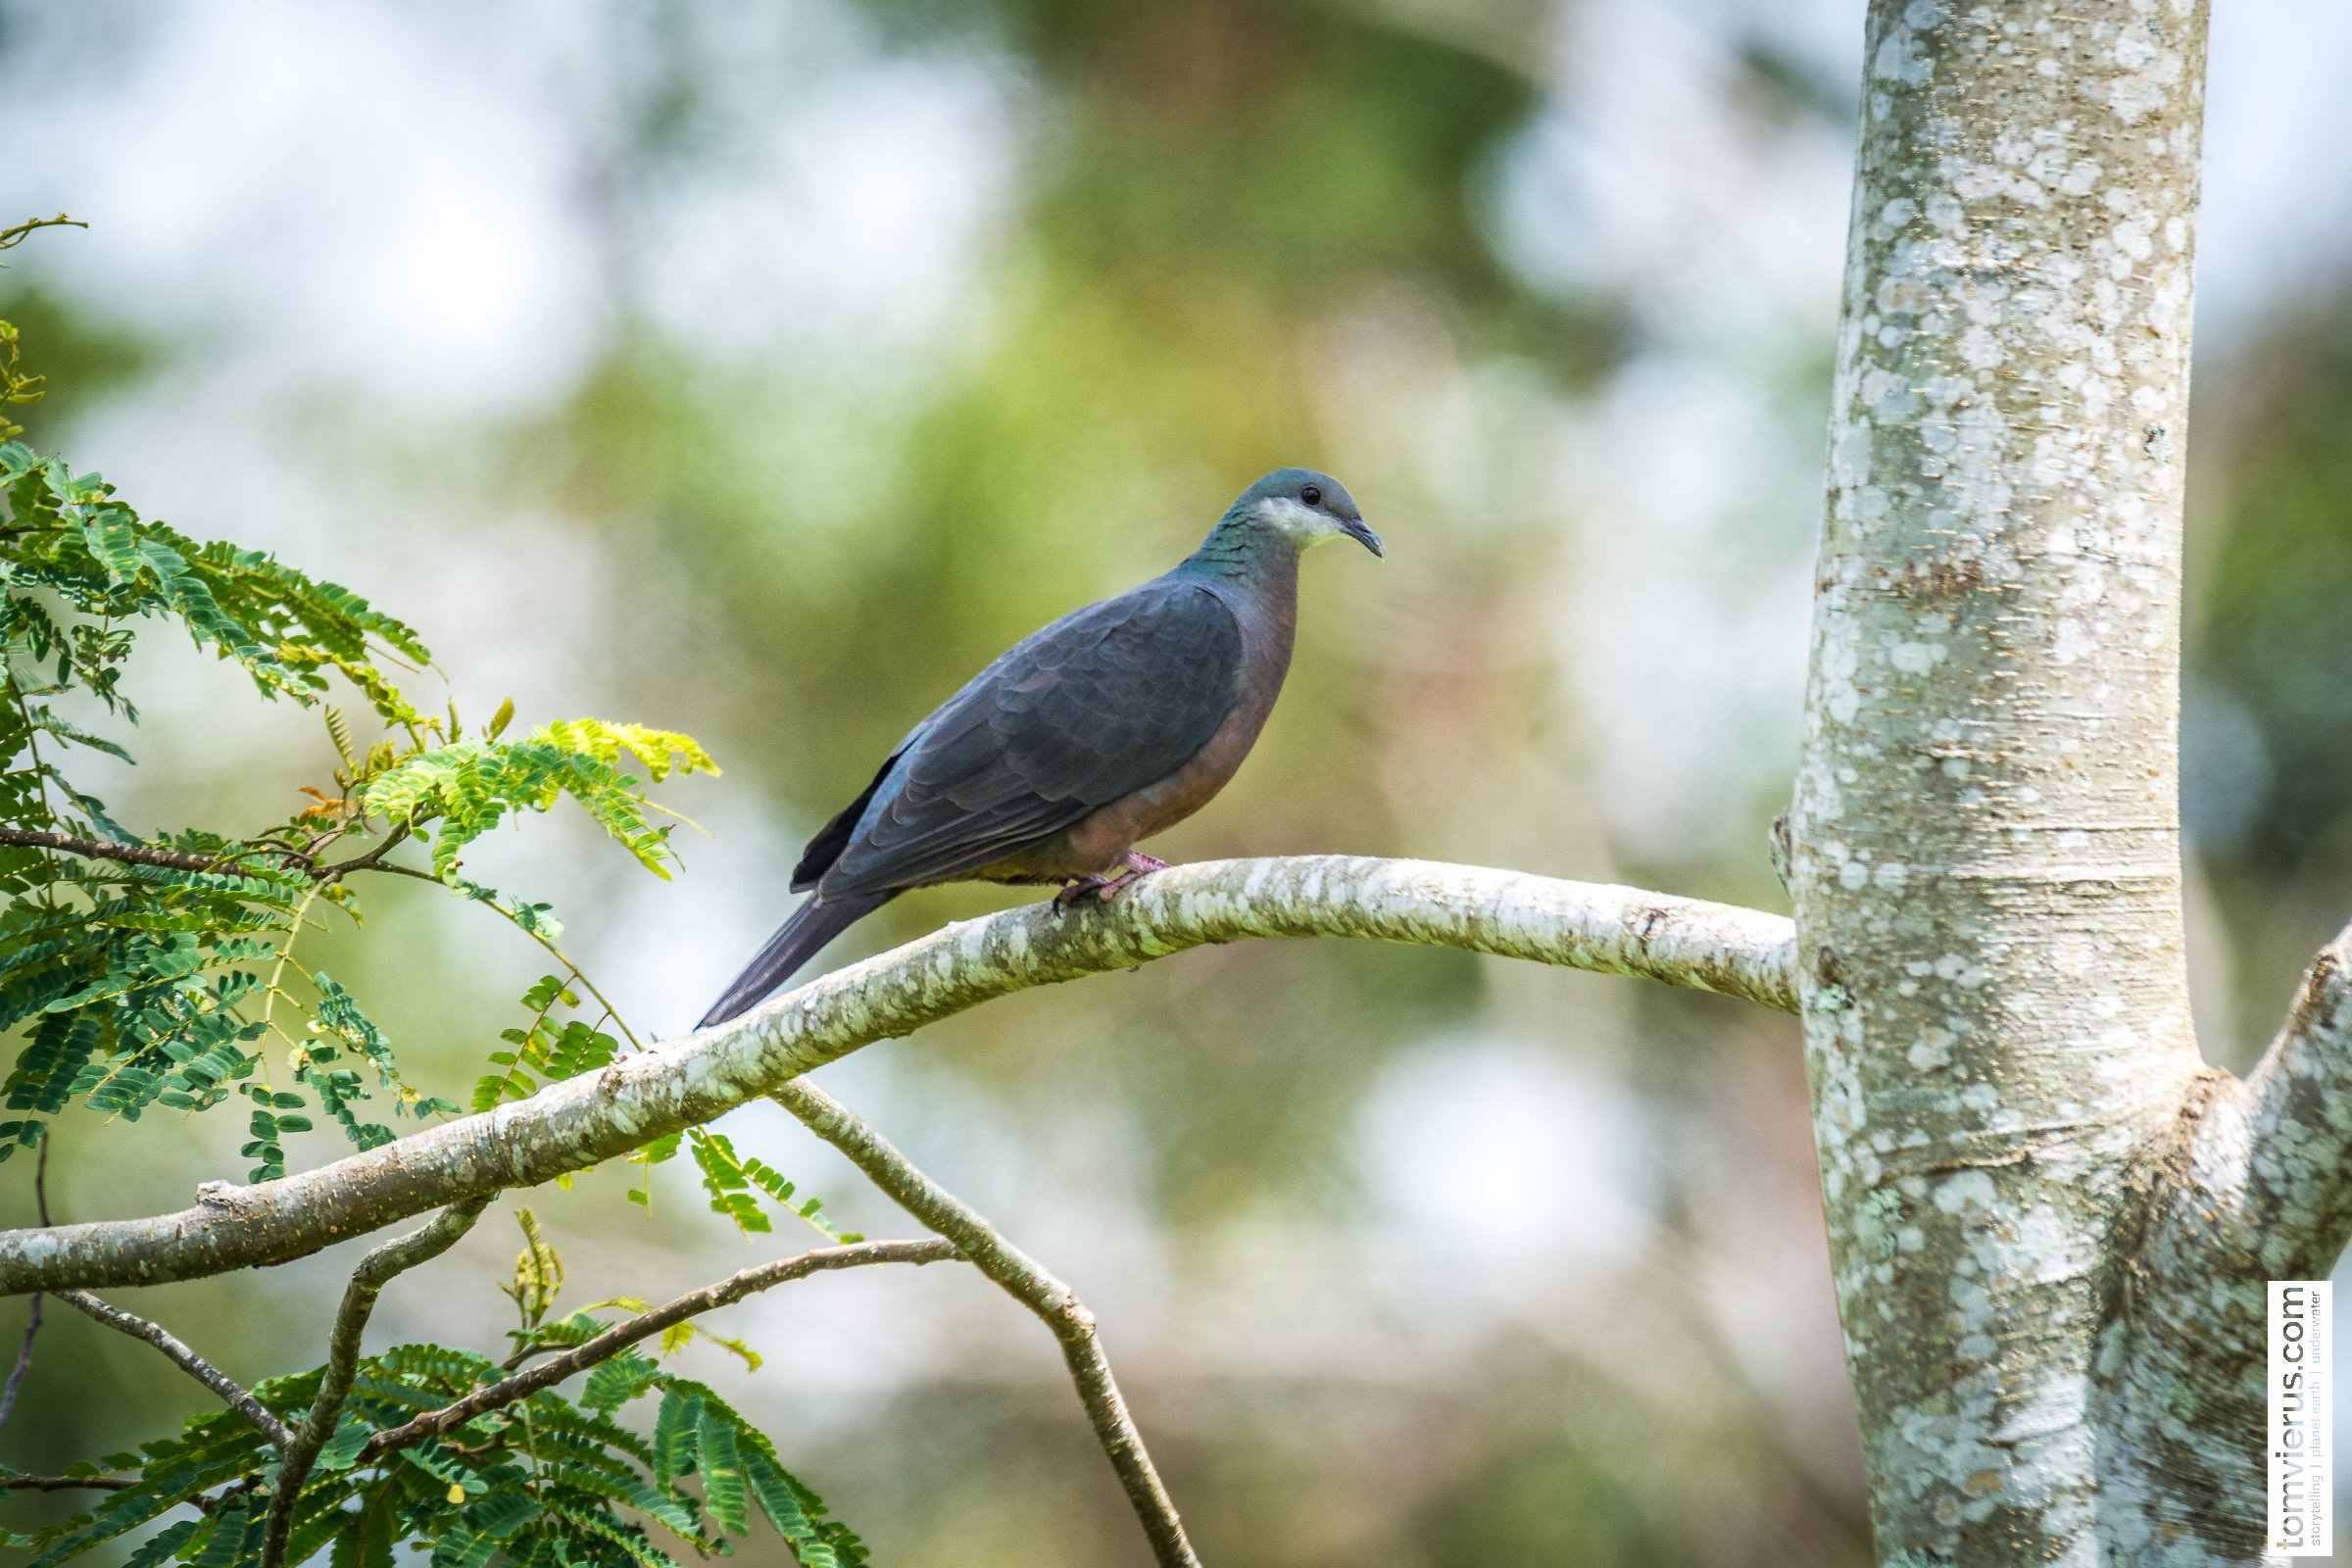 White-throated pigeon